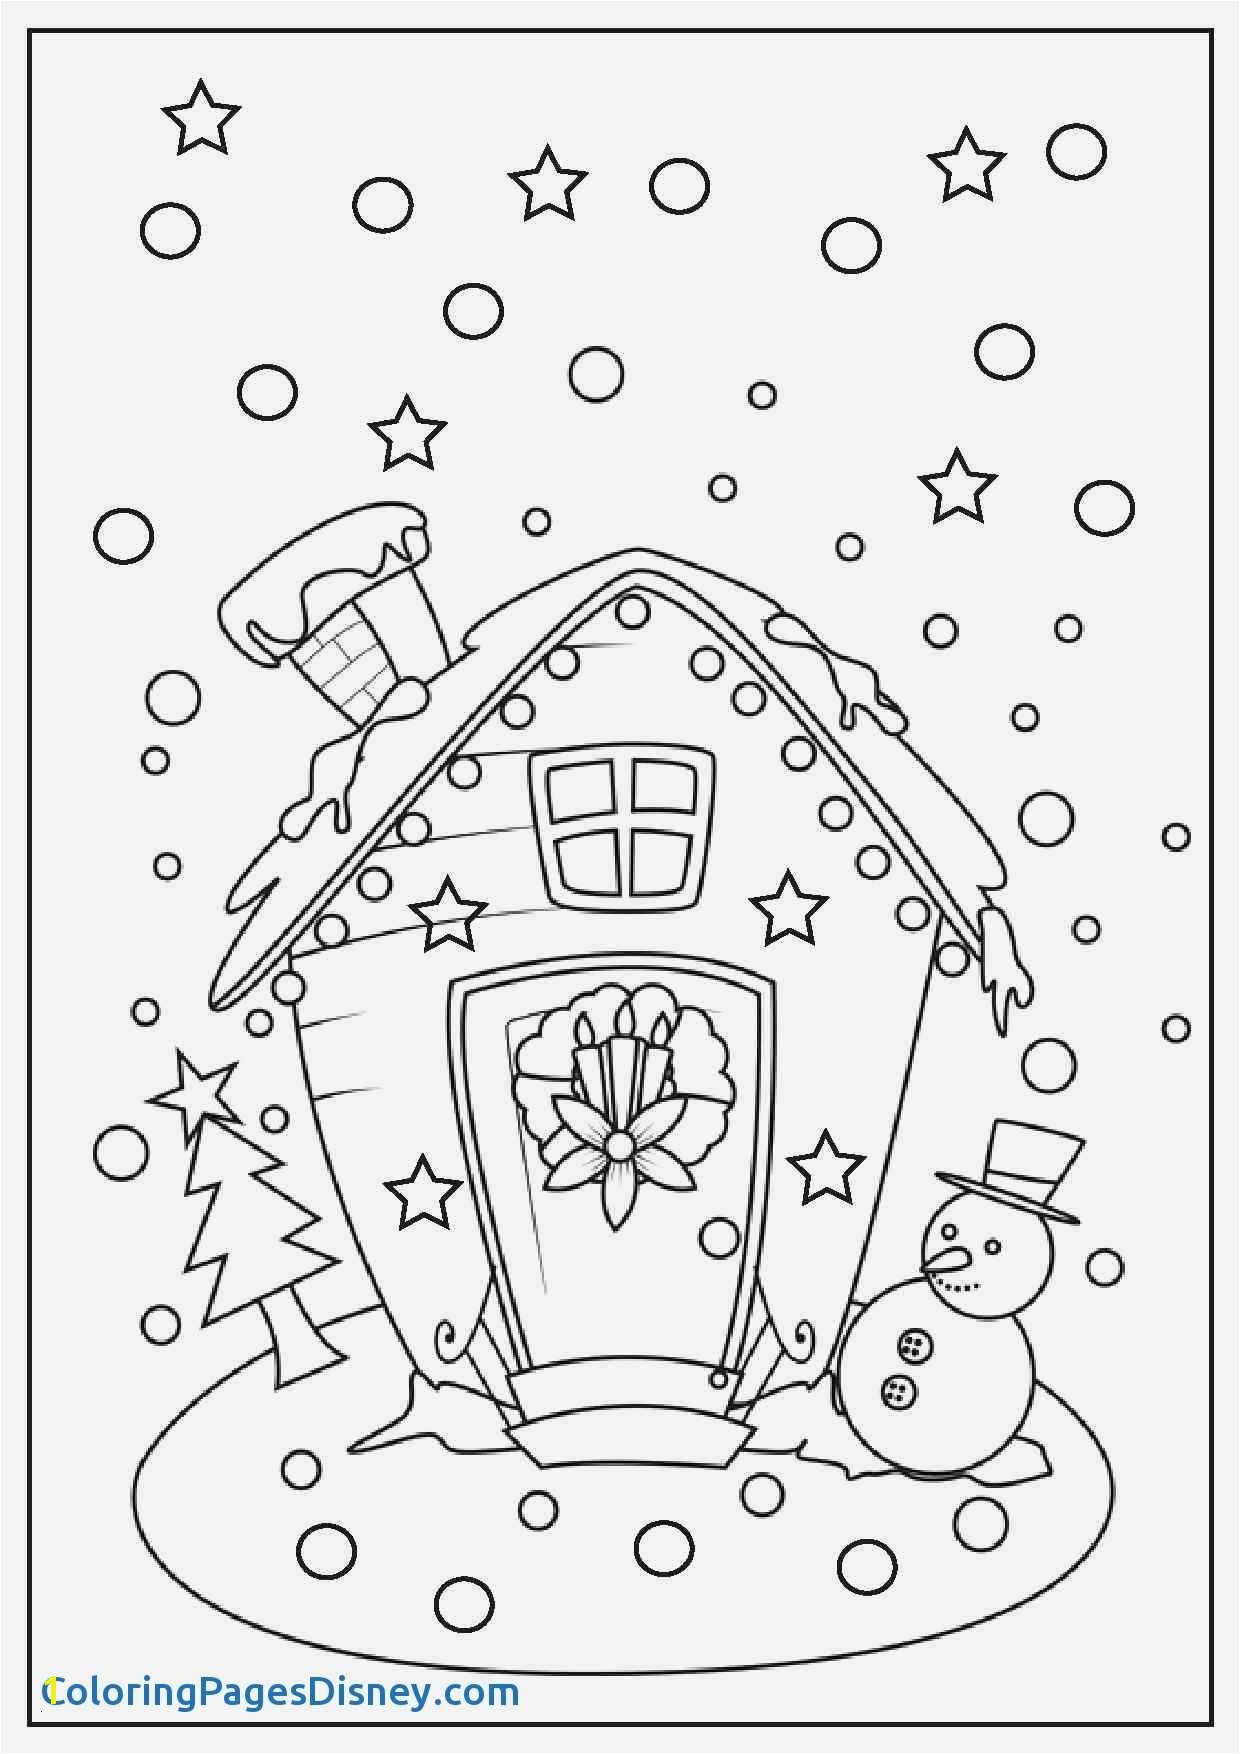 Fourth July Coloring Pages Unique Great Disney Printable Coloring Pages Letramac